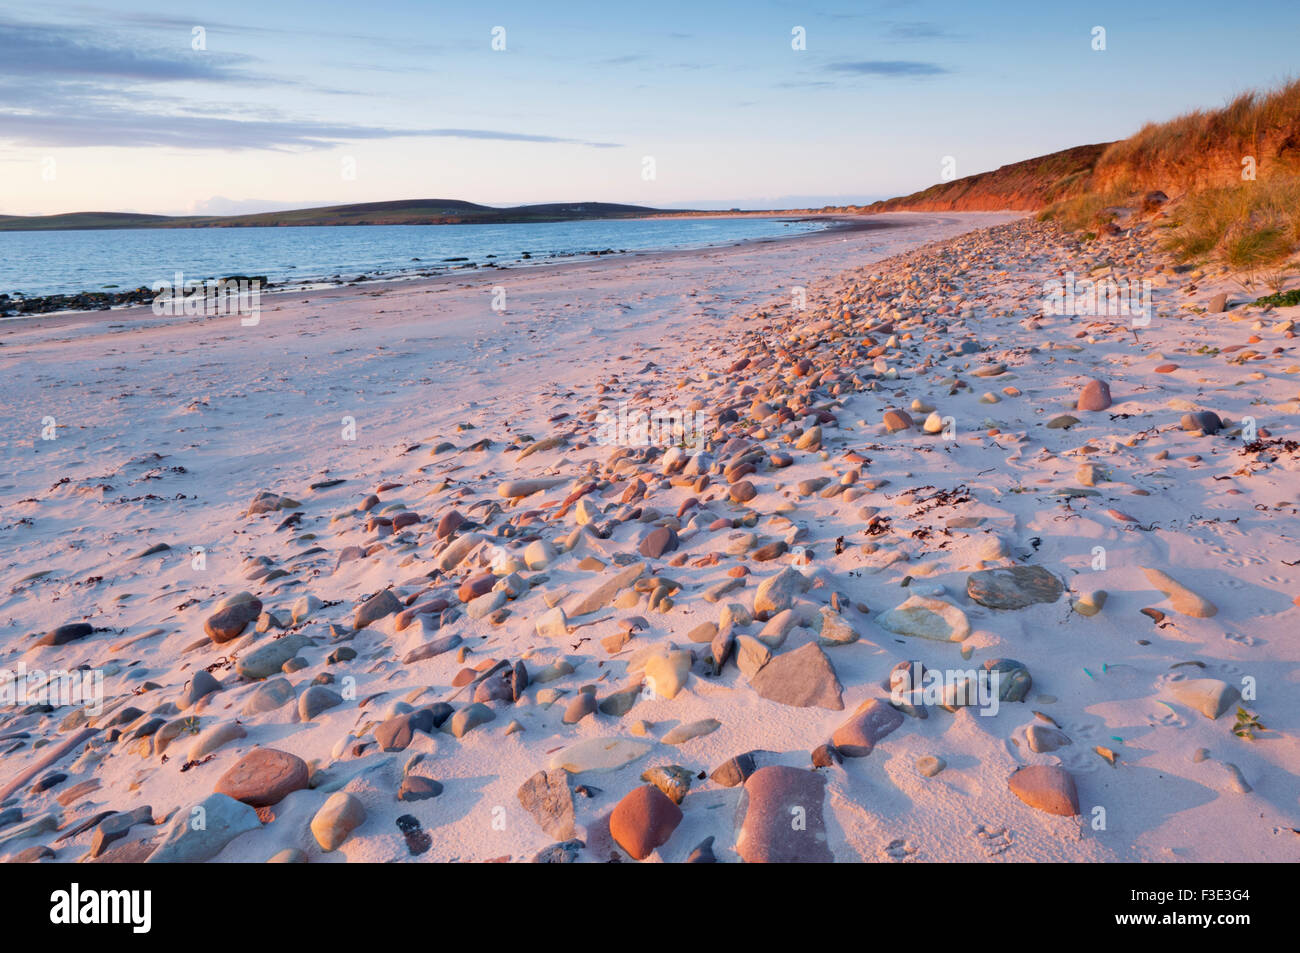 The Sands of Mussetter on the island of Eday, Orkney Islands, Scotland. Stock Photo